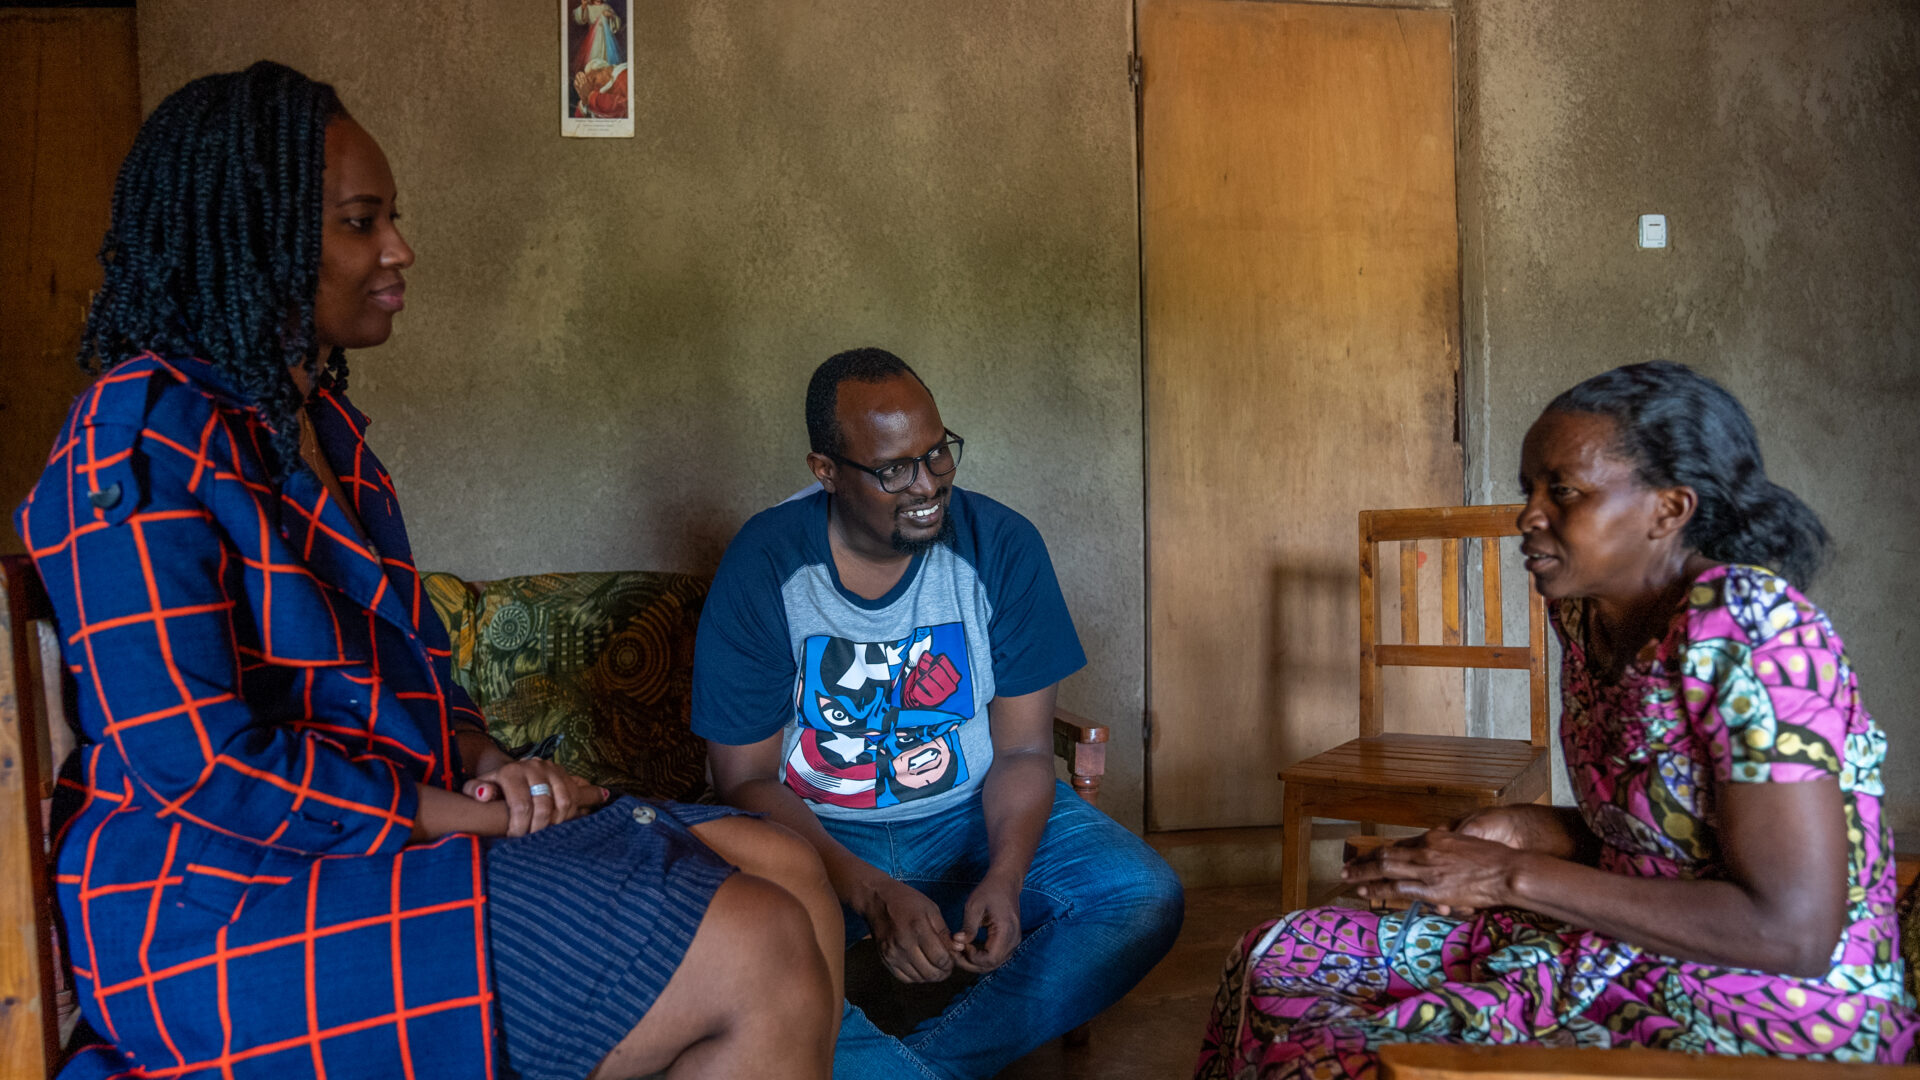 Child psychologists meet with prospective foster parents in their home in Rwanda